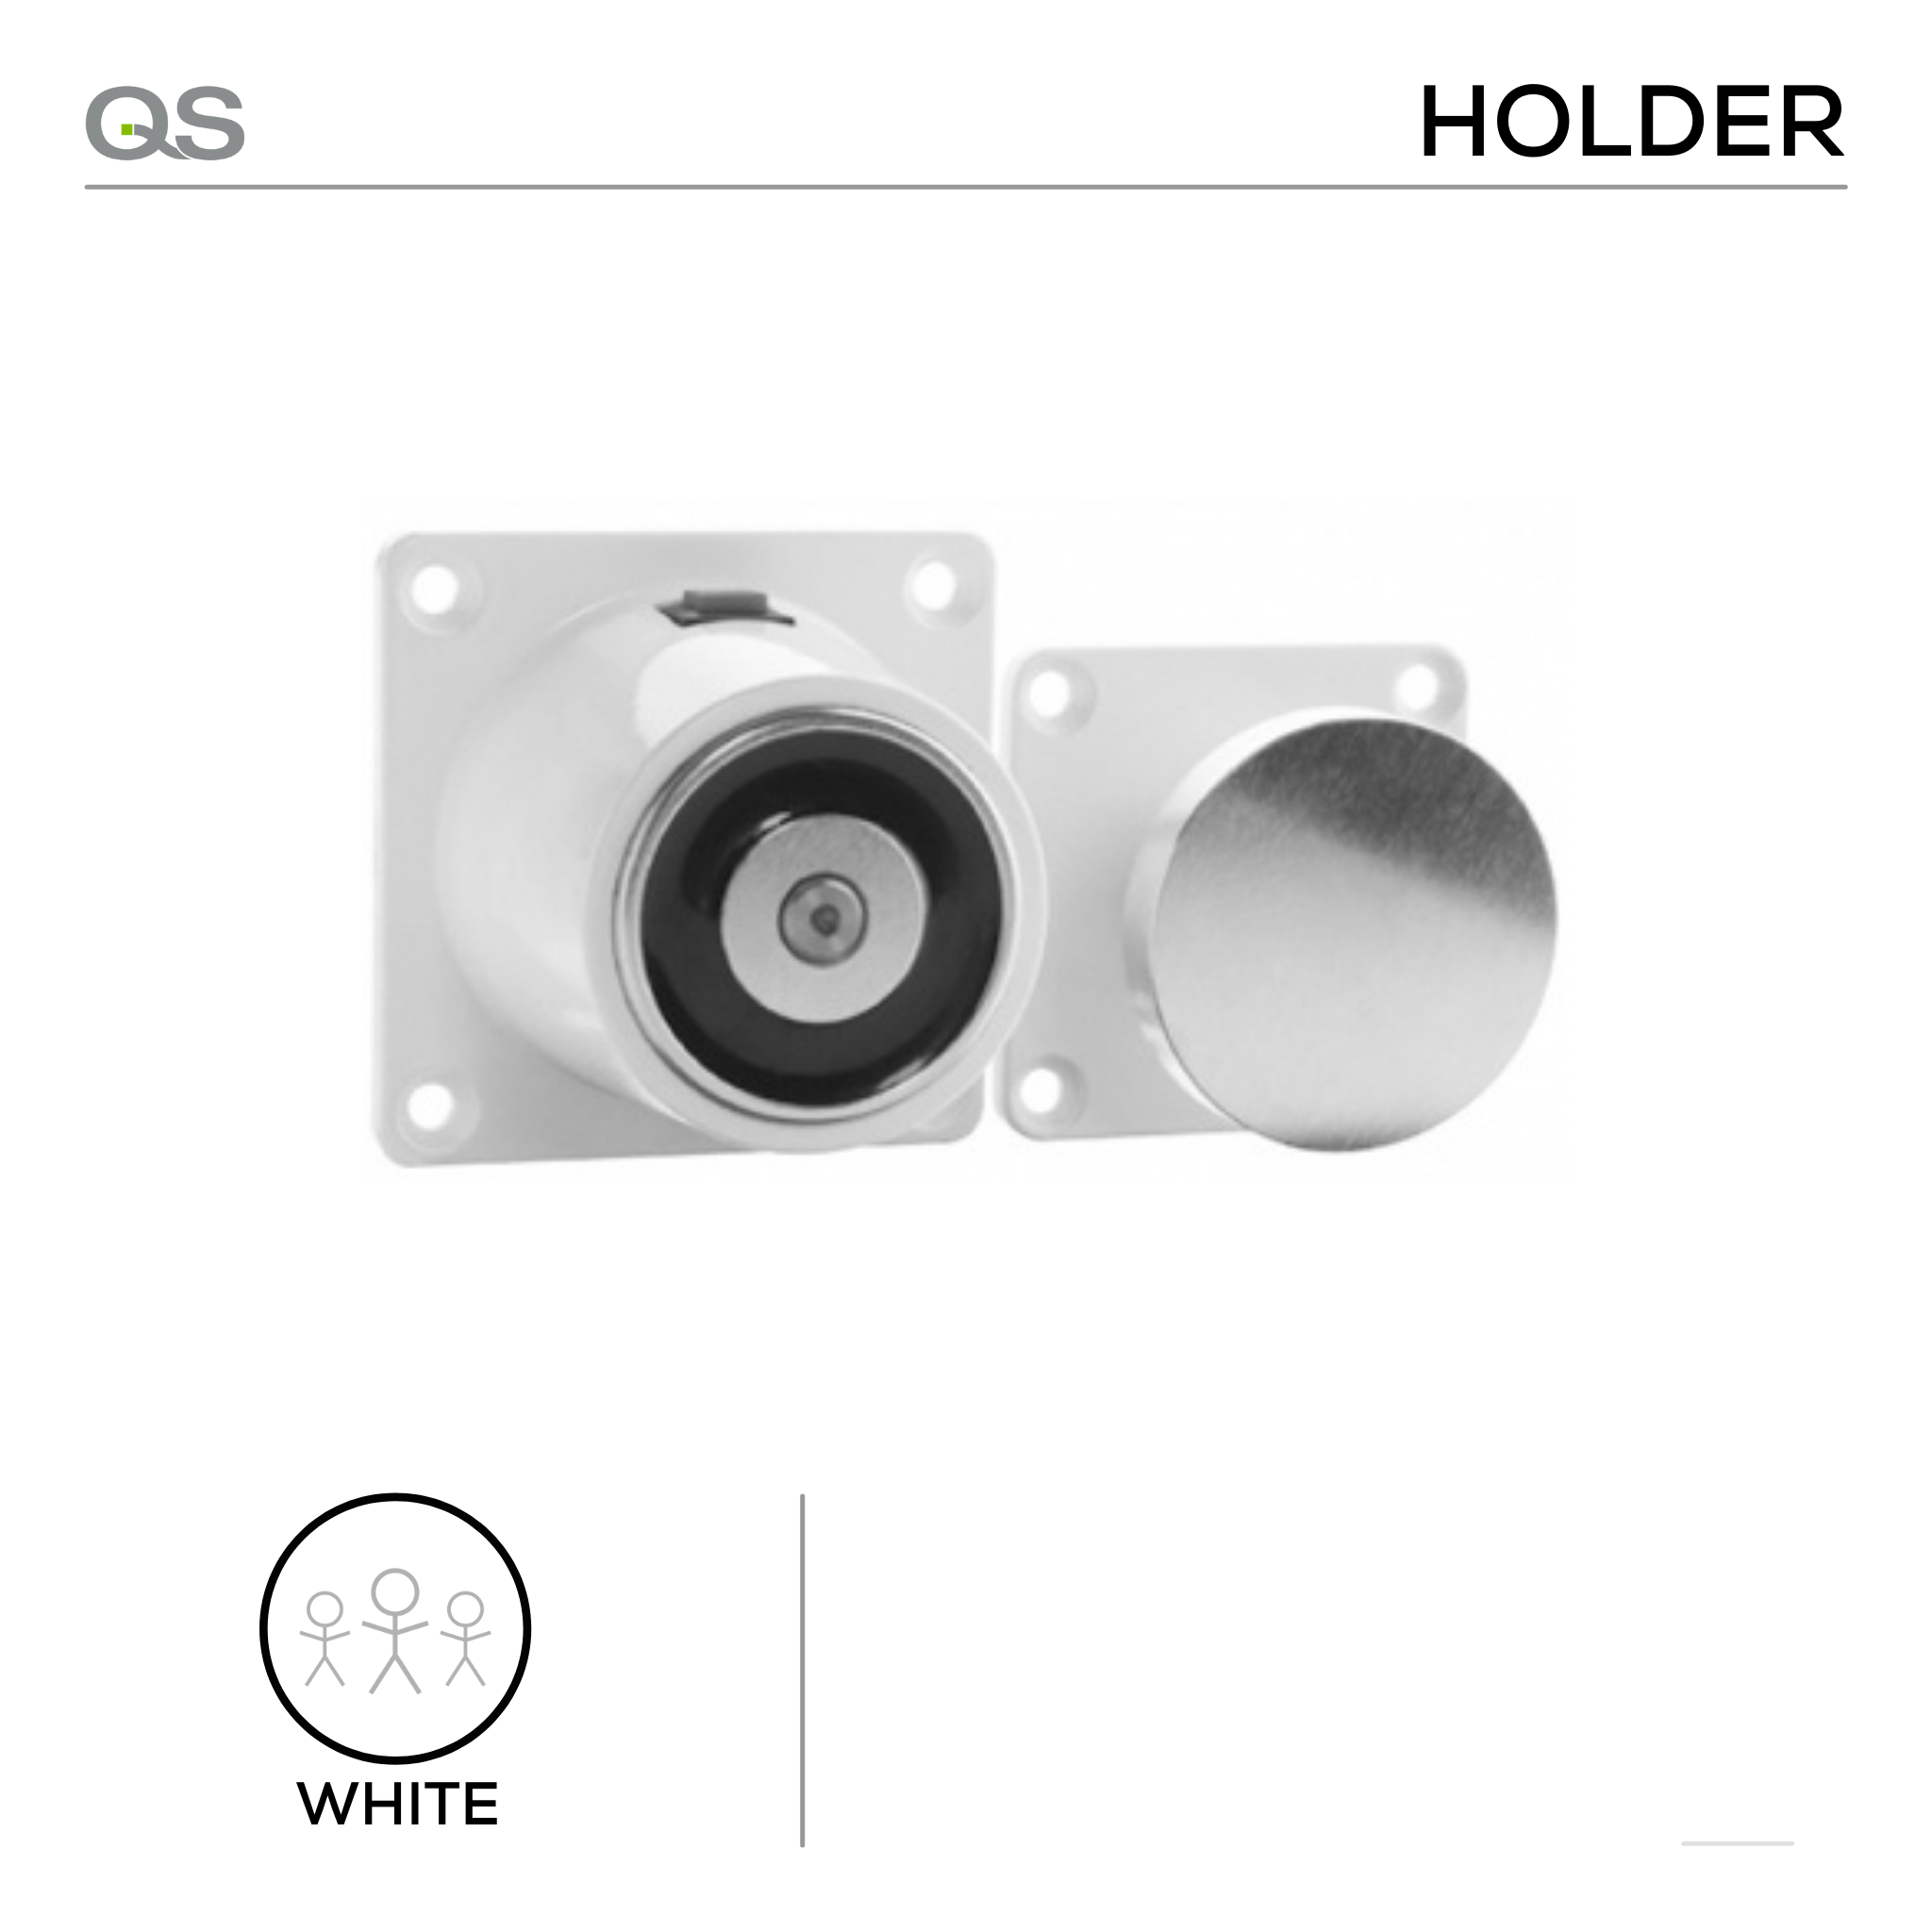 QS767, Door Holder, Wall Mounted Magnetic, With Release Button, 24V, White, QS